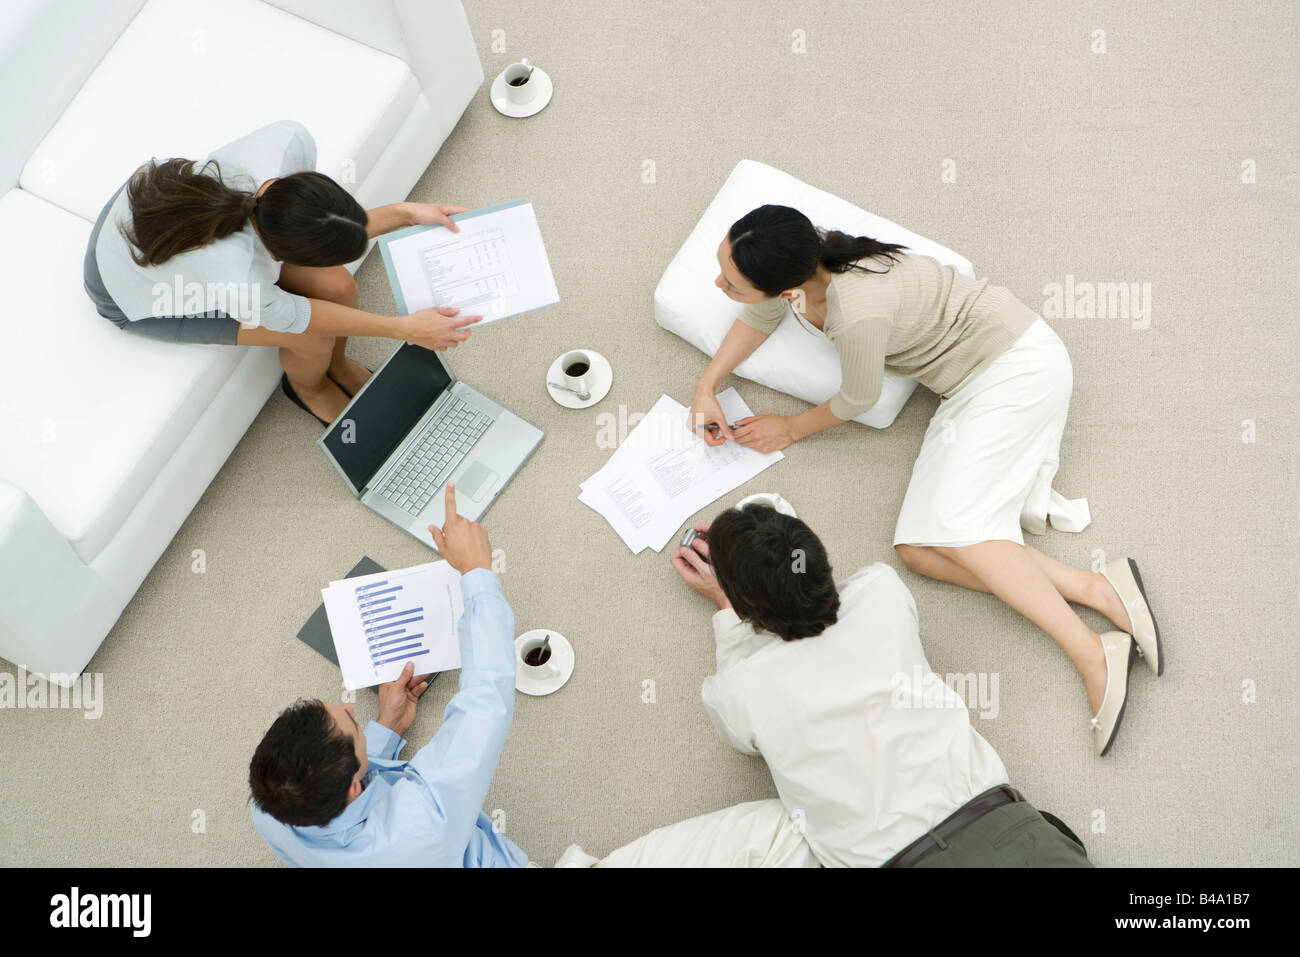 Team of professionals discussing documents in casual work environment, overhead view Stock Photo